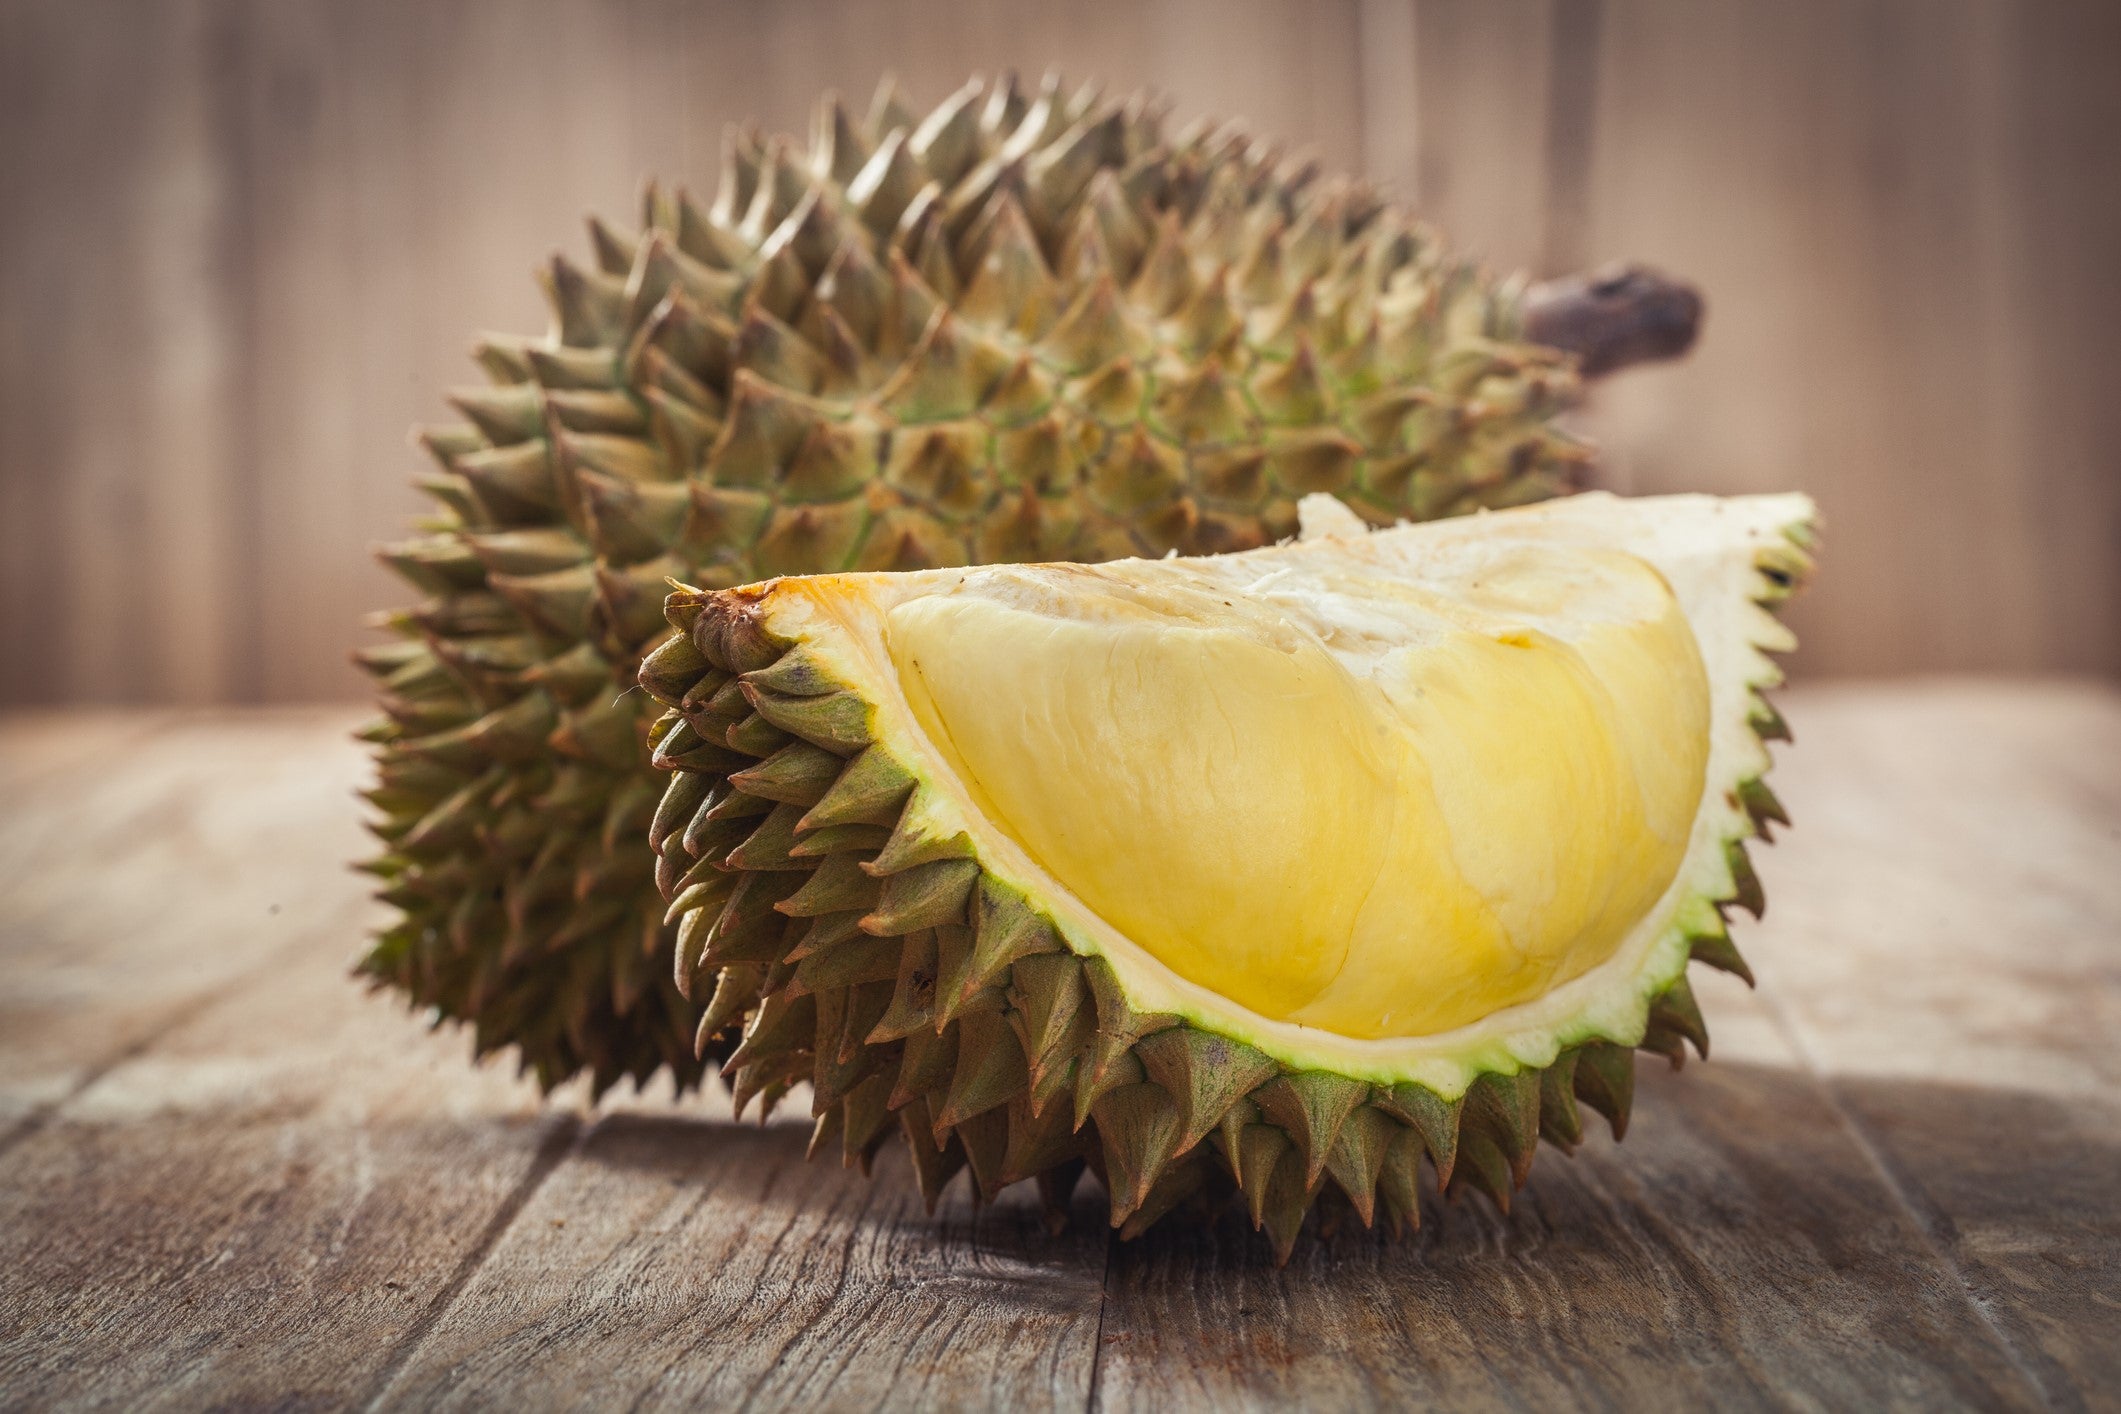 The durian is known as "the king of fruits" and is famously smelly